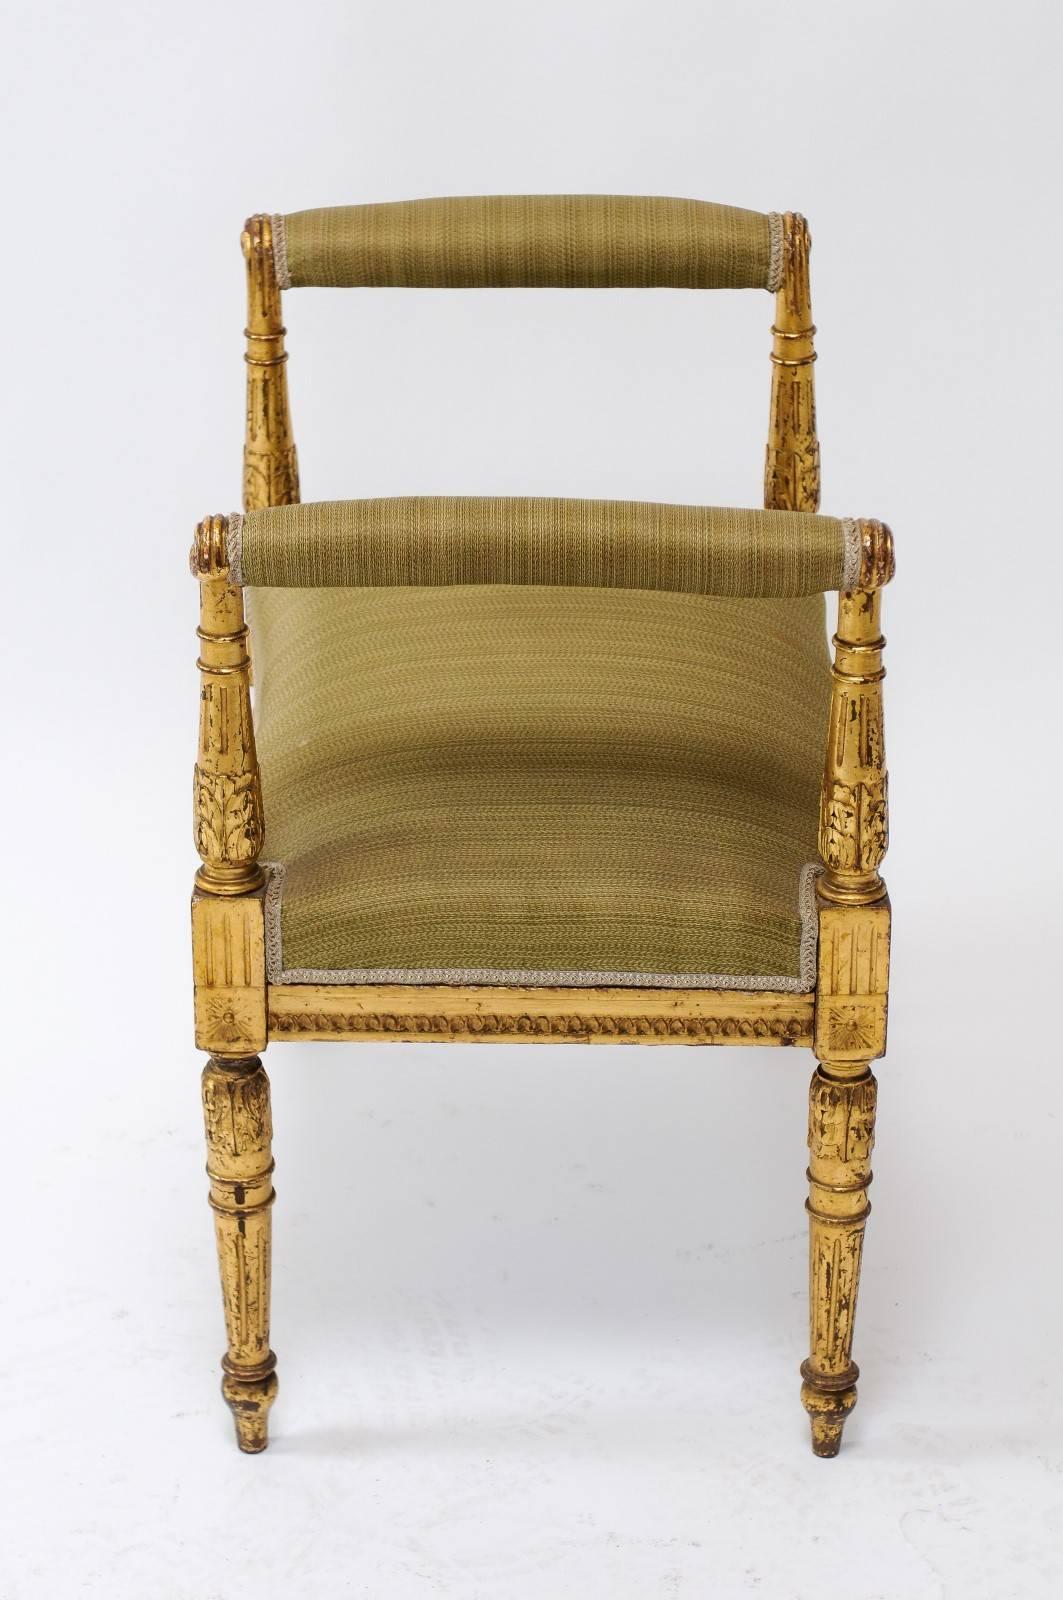 19th Century French Giltwood Louis XVI Style Upholstered Bench with Out-Scrolled Arms